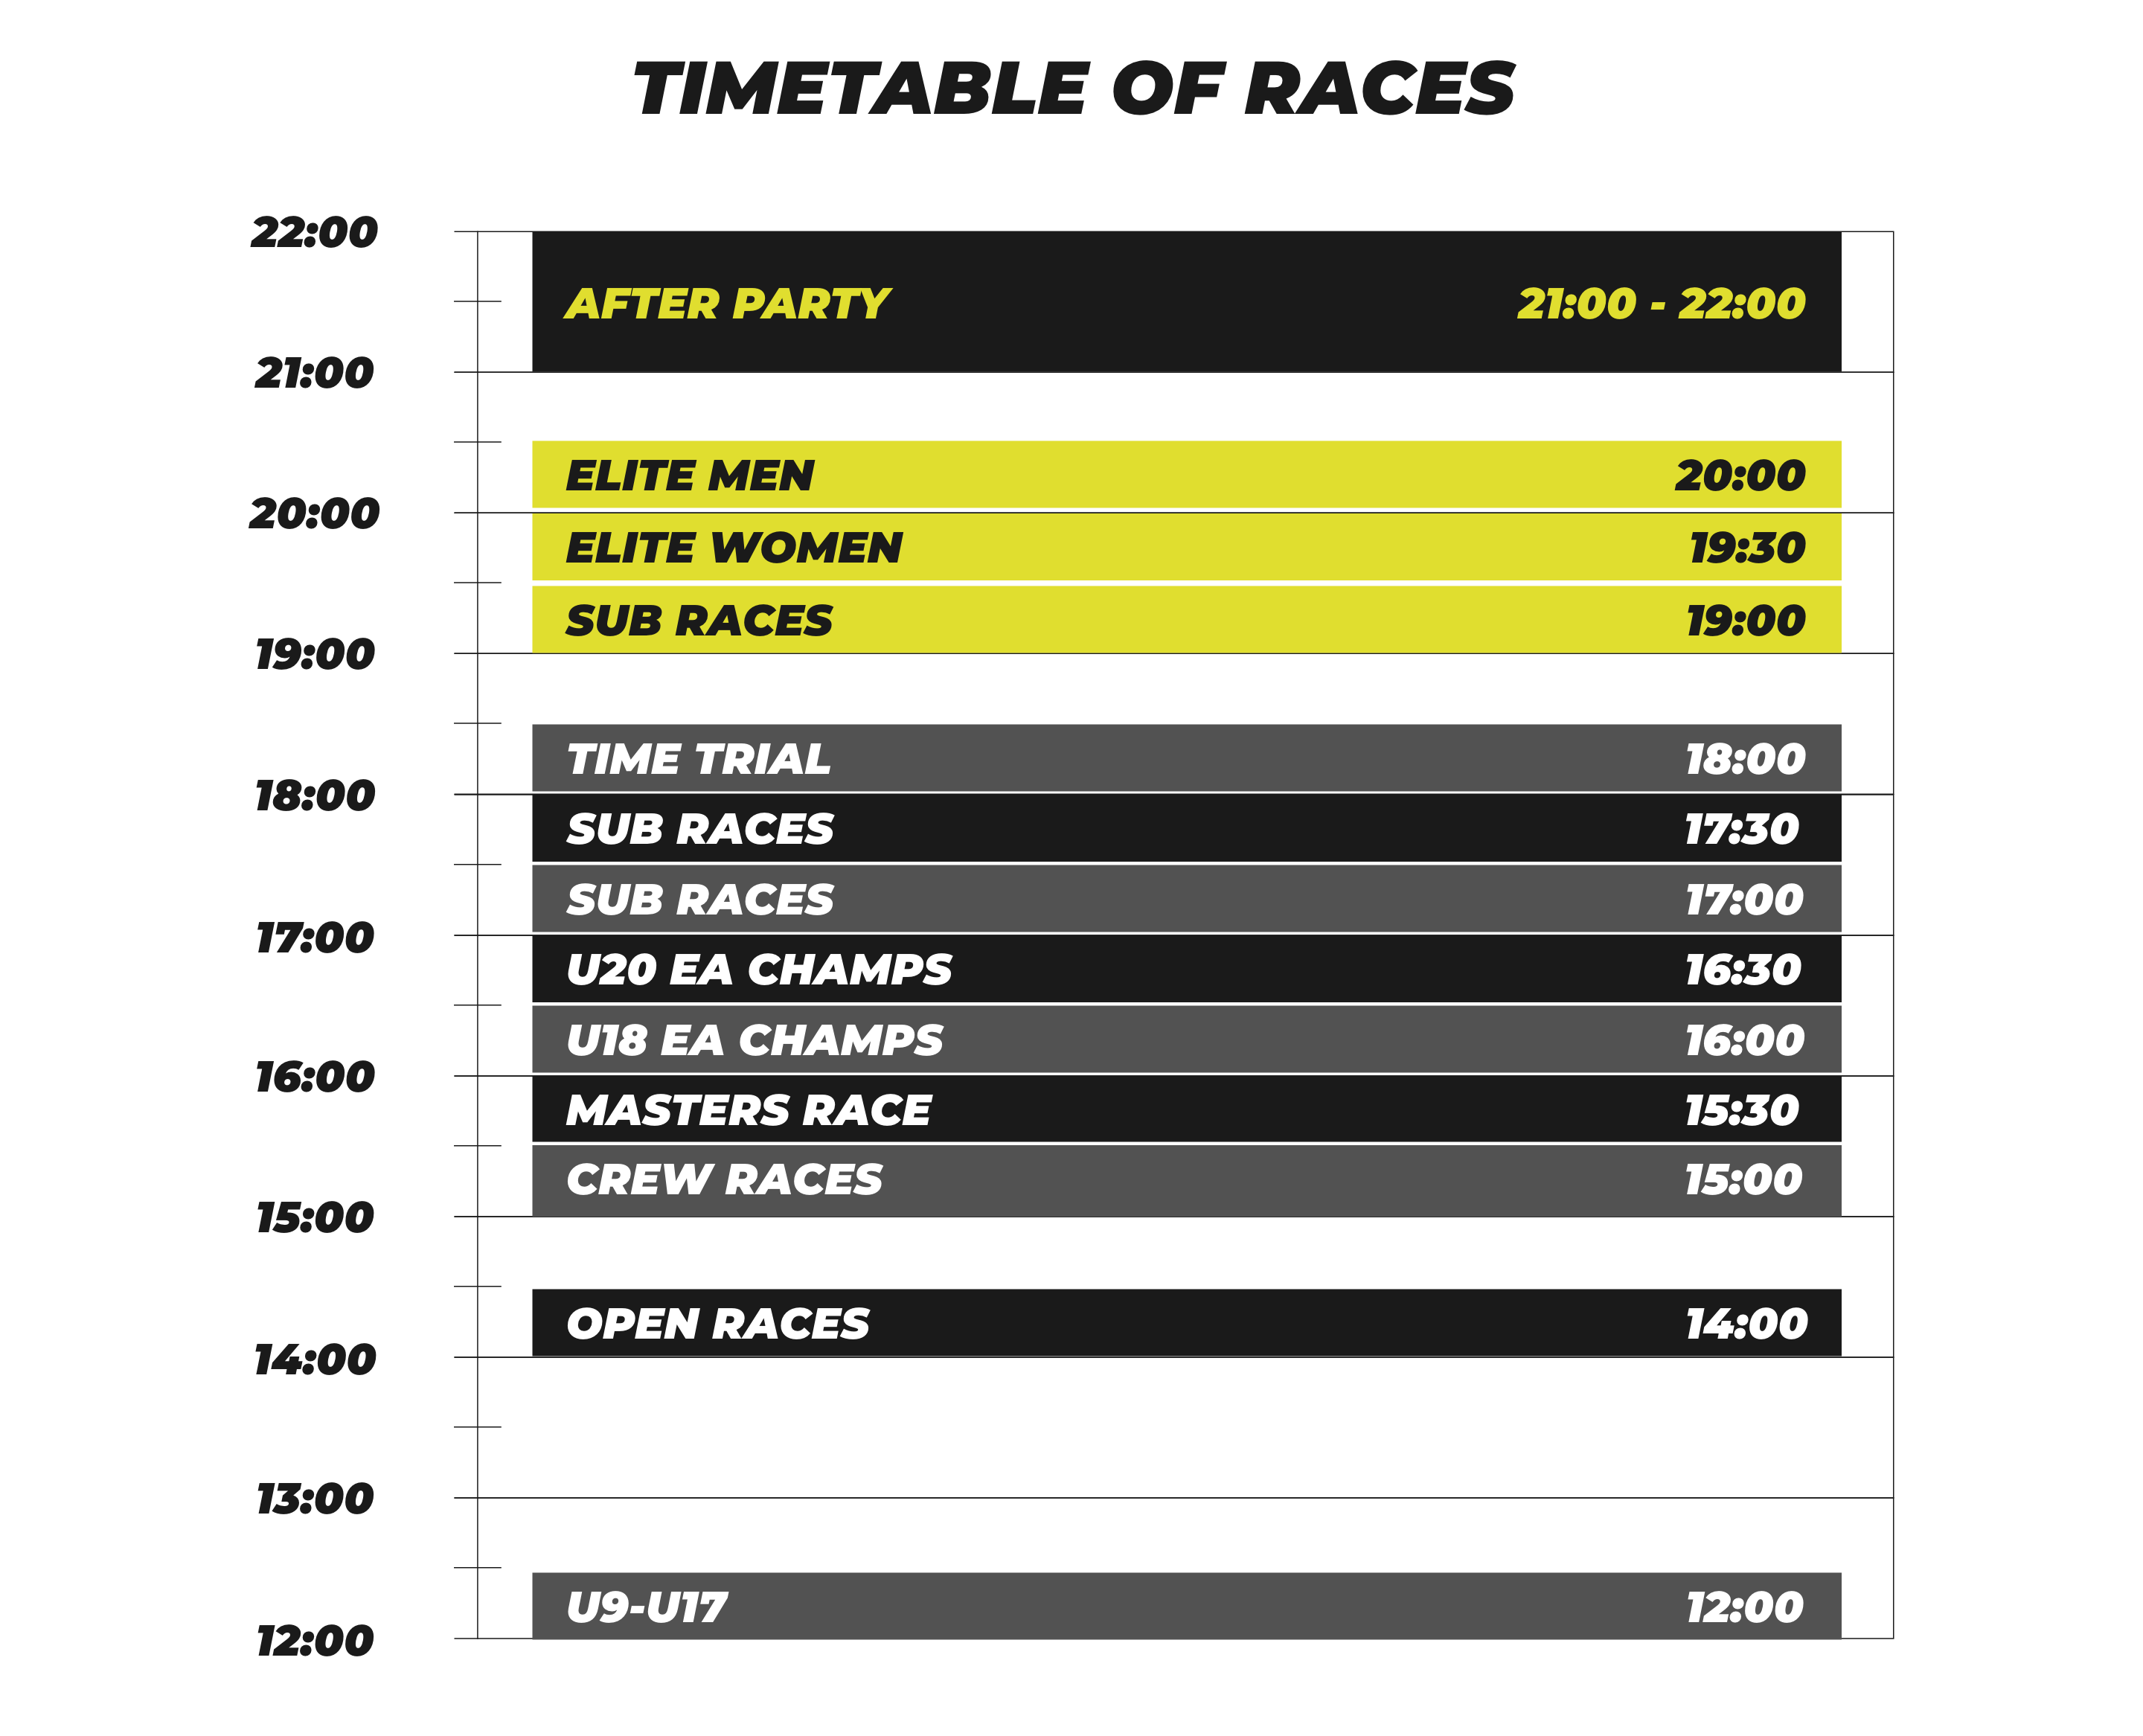 Timetable of Races